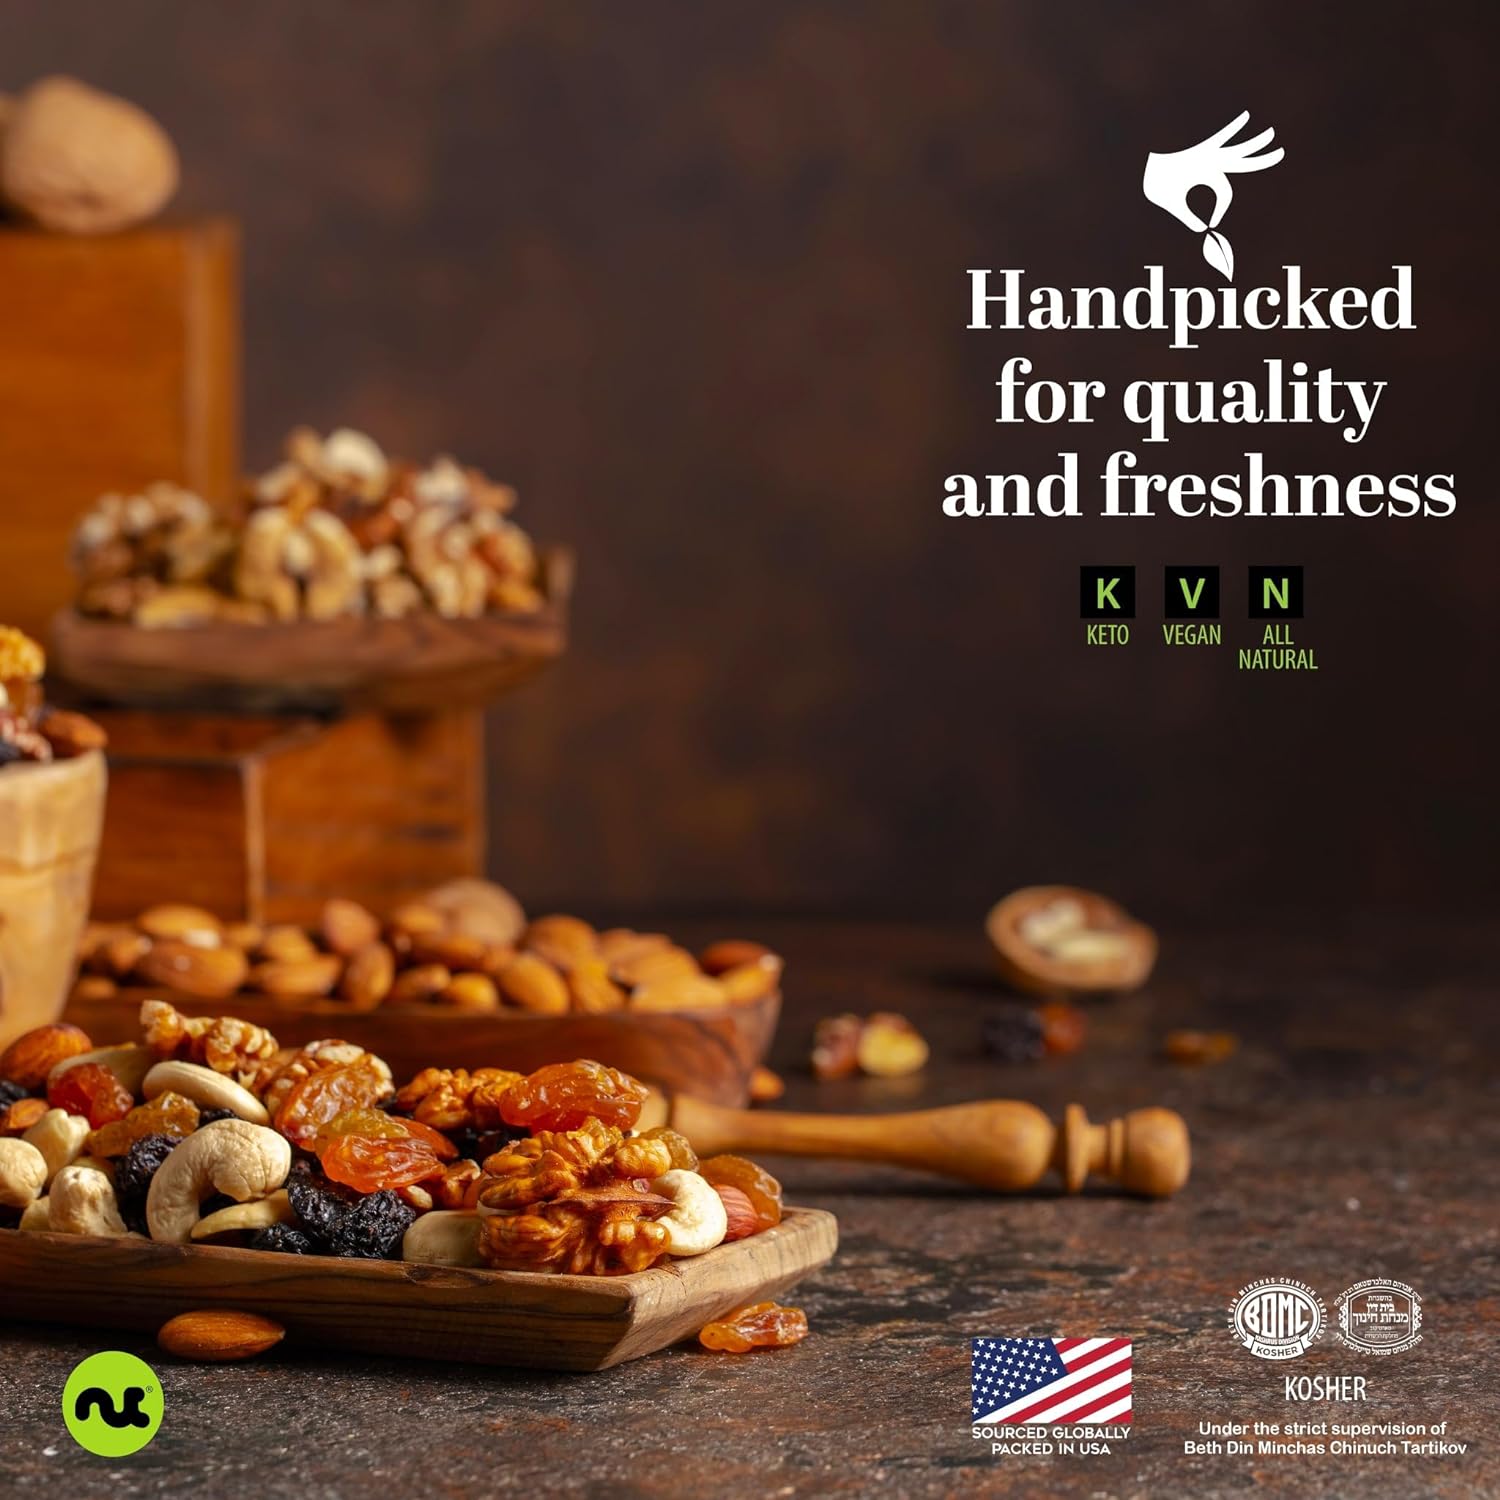 Nut Cravings - Roasted & Salted Mixed Nuts - Brazils, Brazil, Pecan, Almond, Hazelnut, Cashew (16oz - 1 LB) Packed Fresh in Resealable Bag - Healthy Protein Food, Natural, Keto Friendly, Vegan, Kosher : Grocery & Gourmet Food